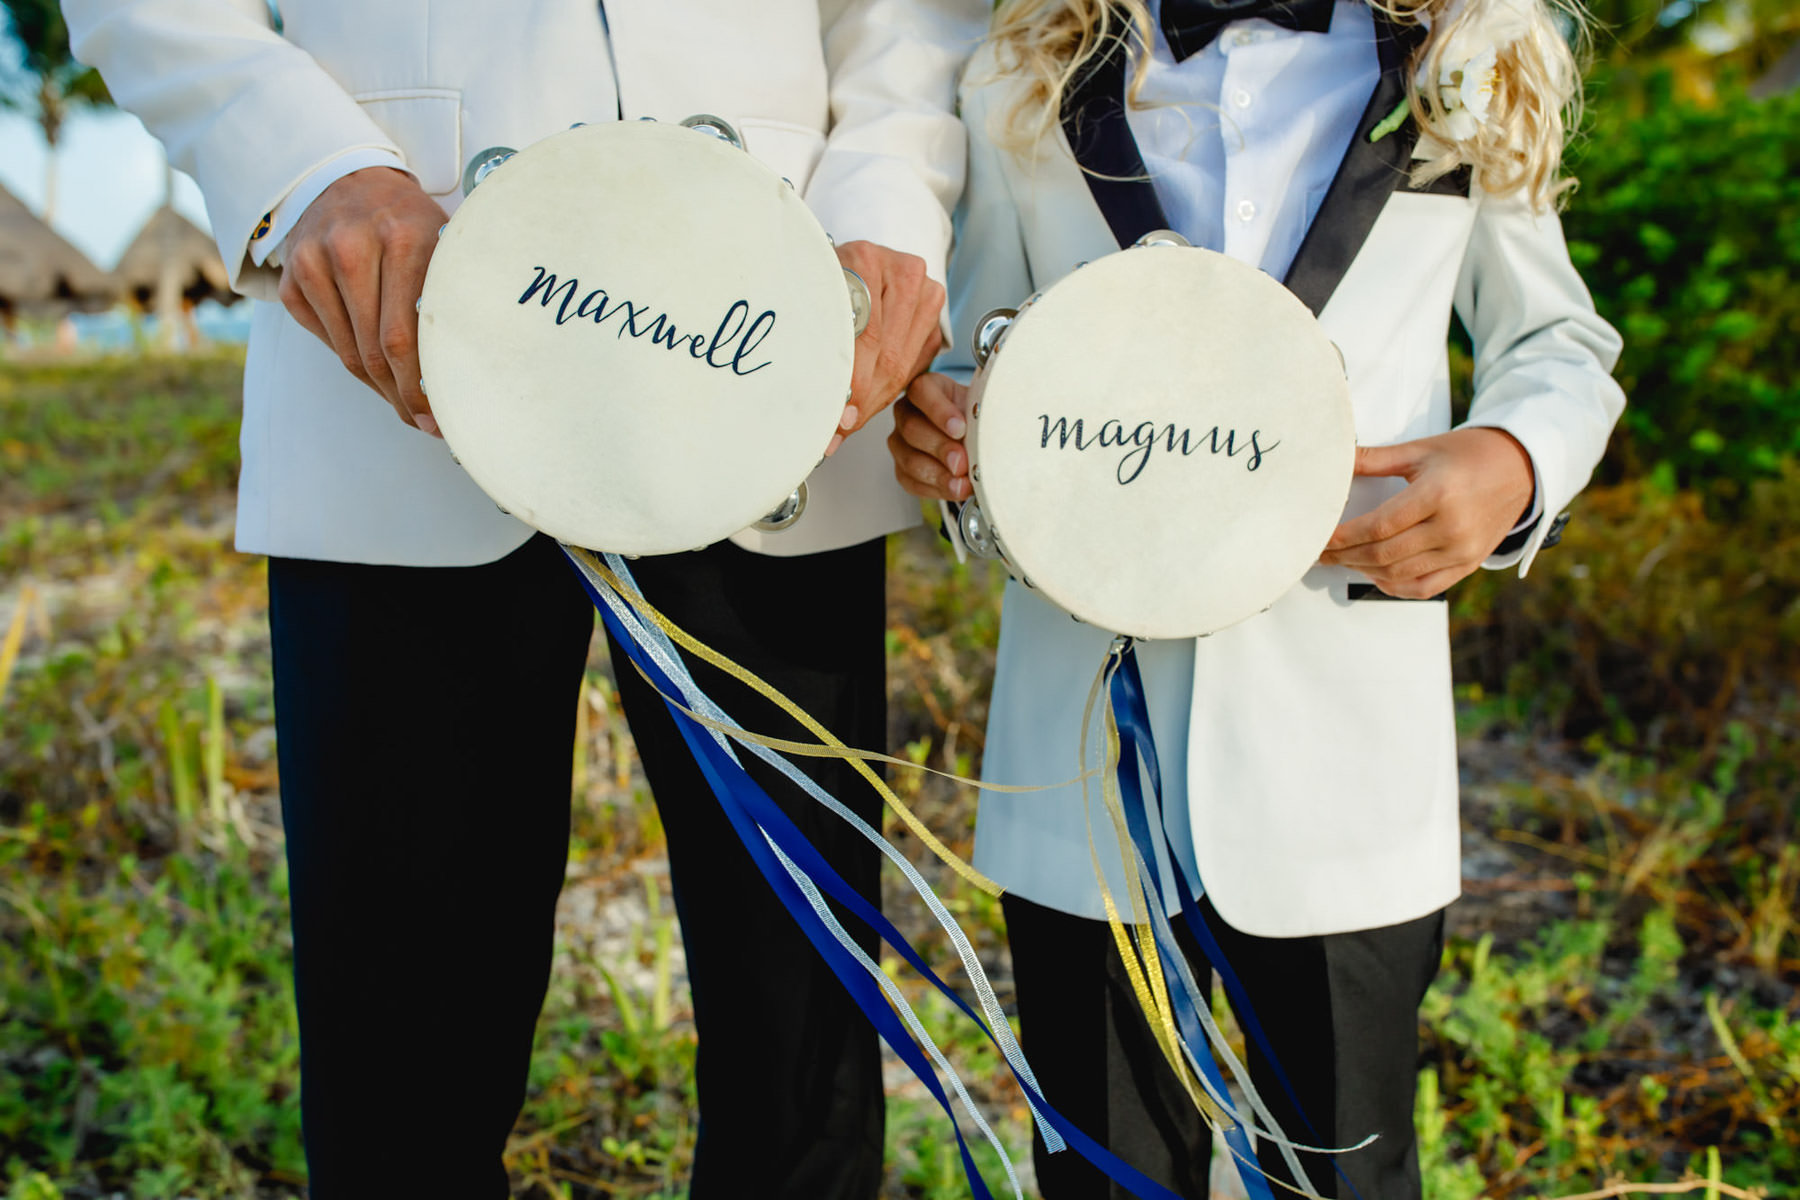 Handmade tambourines adding a musical touch to the ceremony gazebo decorations.